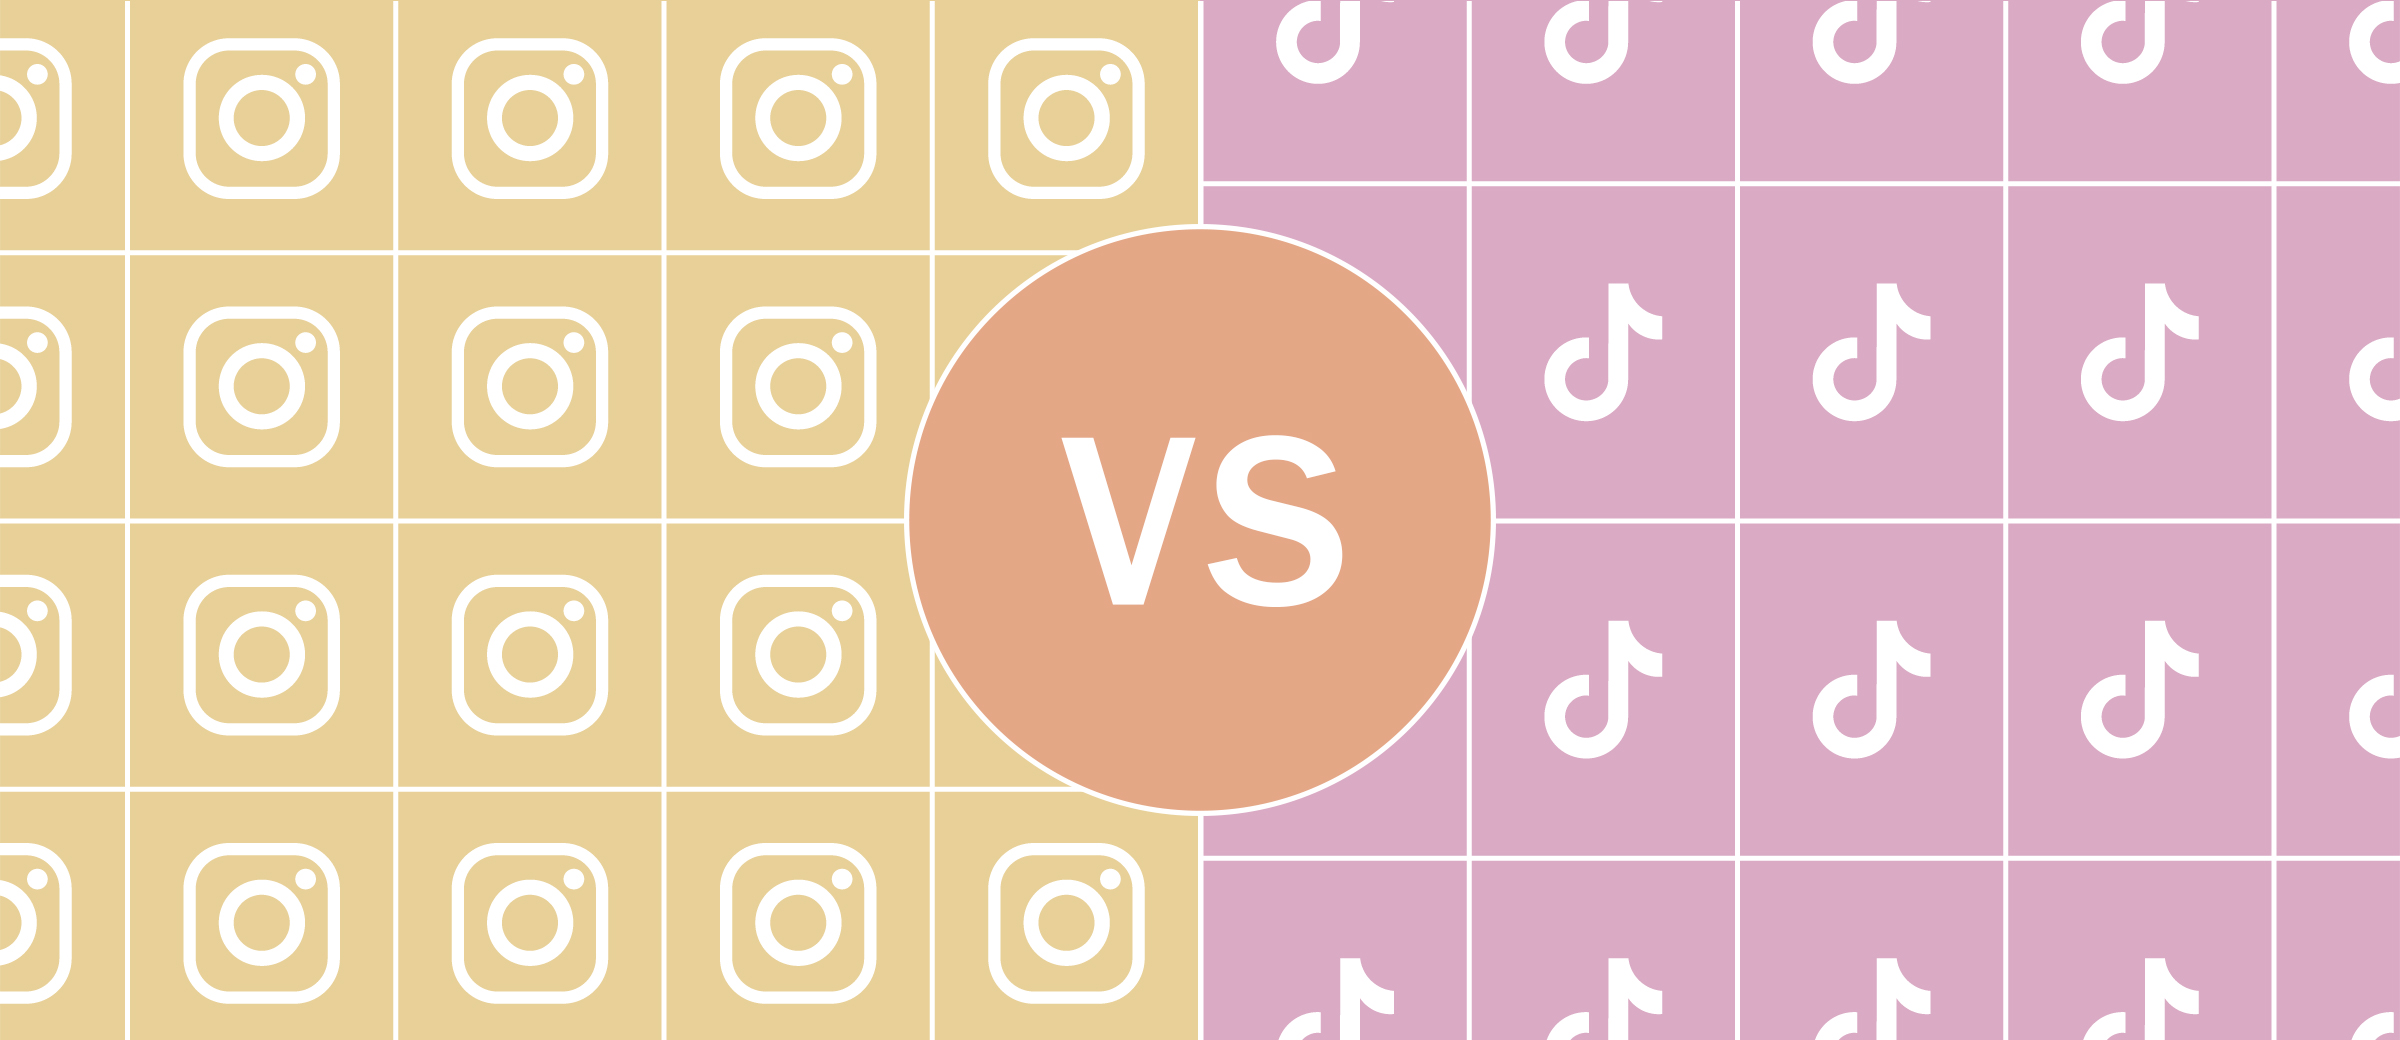 Read about TikTok Vs. Instagram: What Types Of Content Should You Post, on PLANOLY